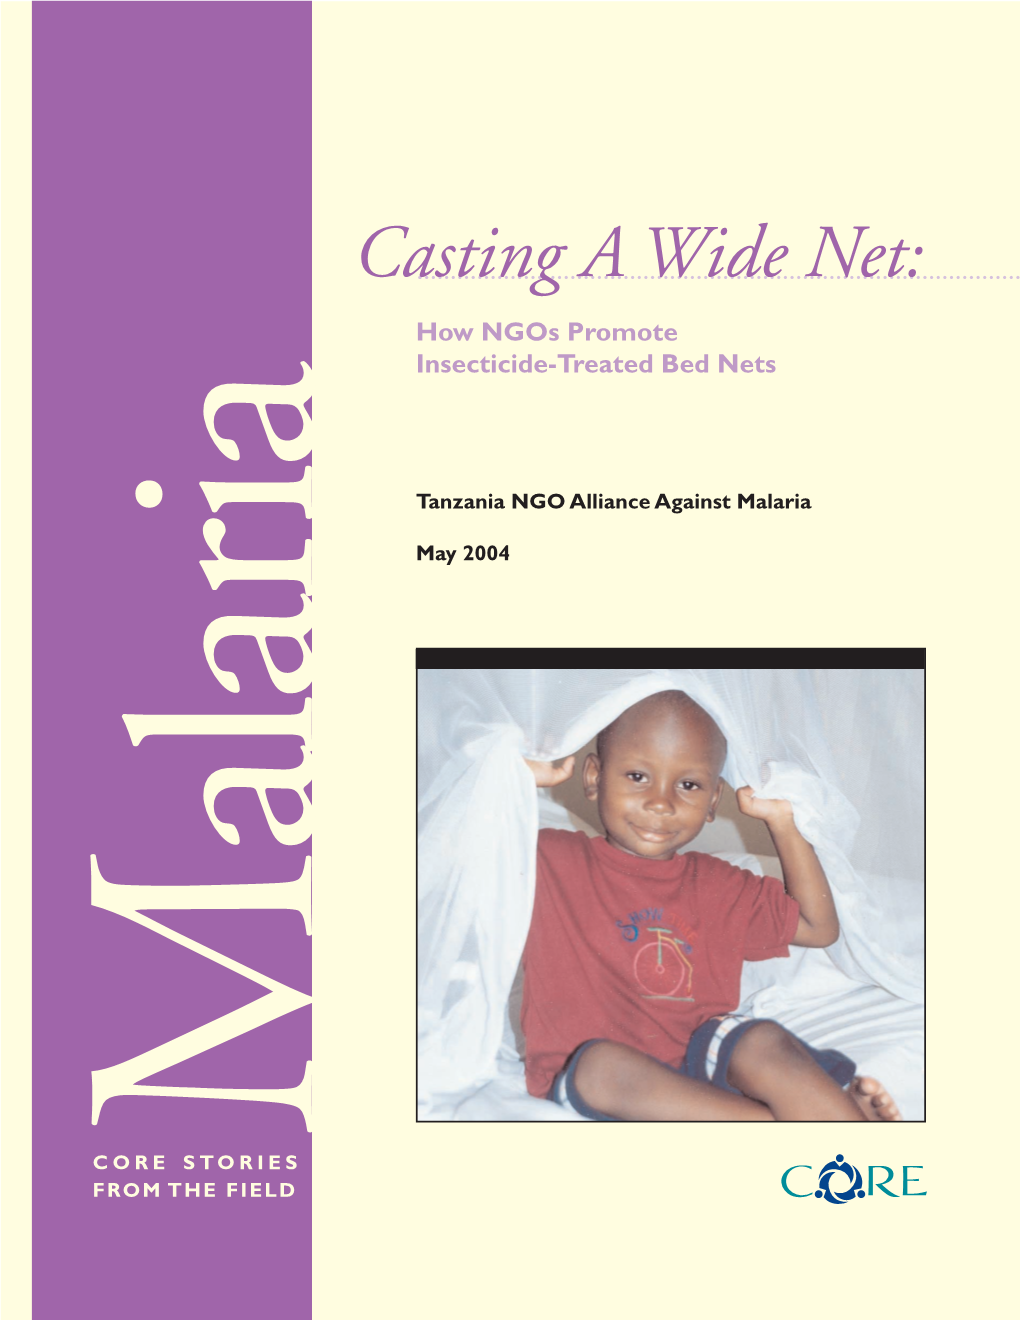 Casting a Wide Net: How Ngos Promote Insecticide-Treated Bed Nets (Tanzania)